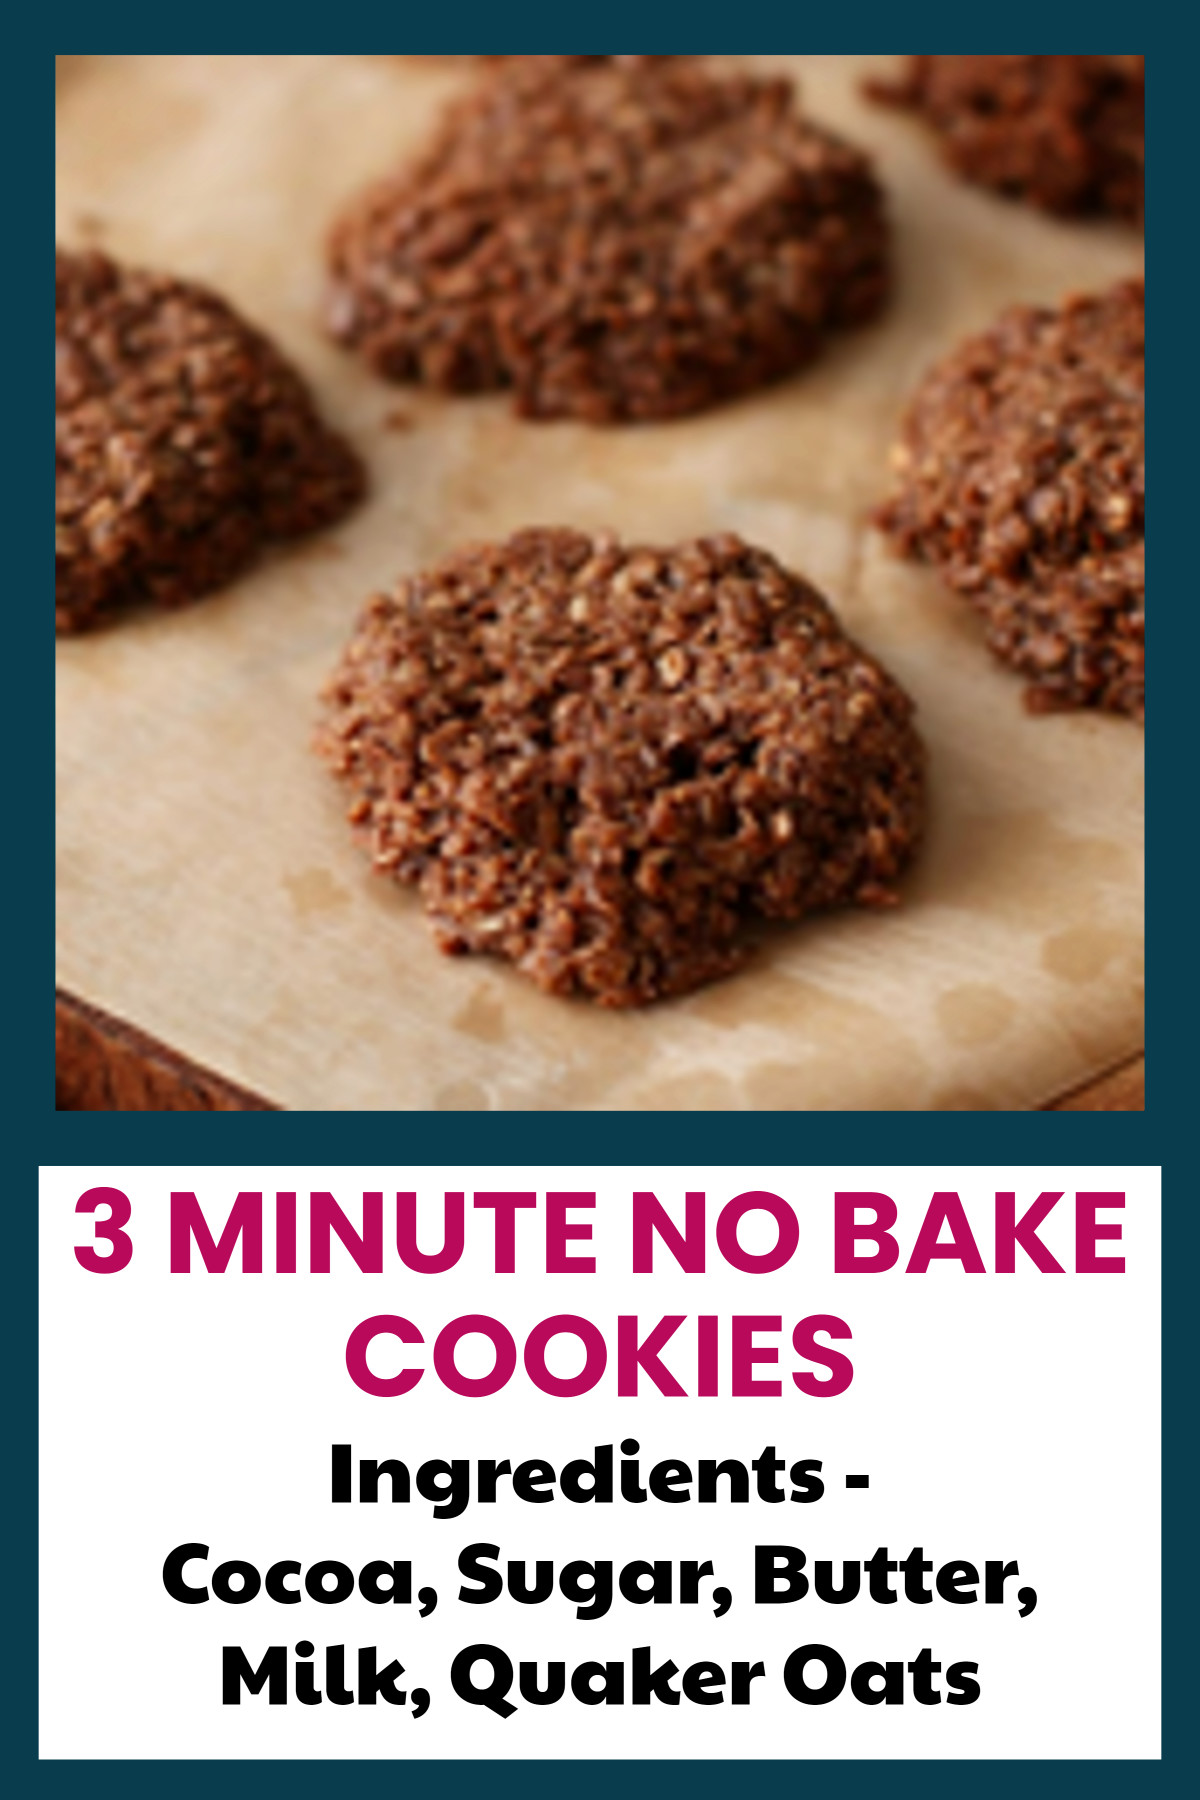 3 Minute No Bake Cookies - made with cocoa, sugar, butter, milk and Quaker Oats oatmeal